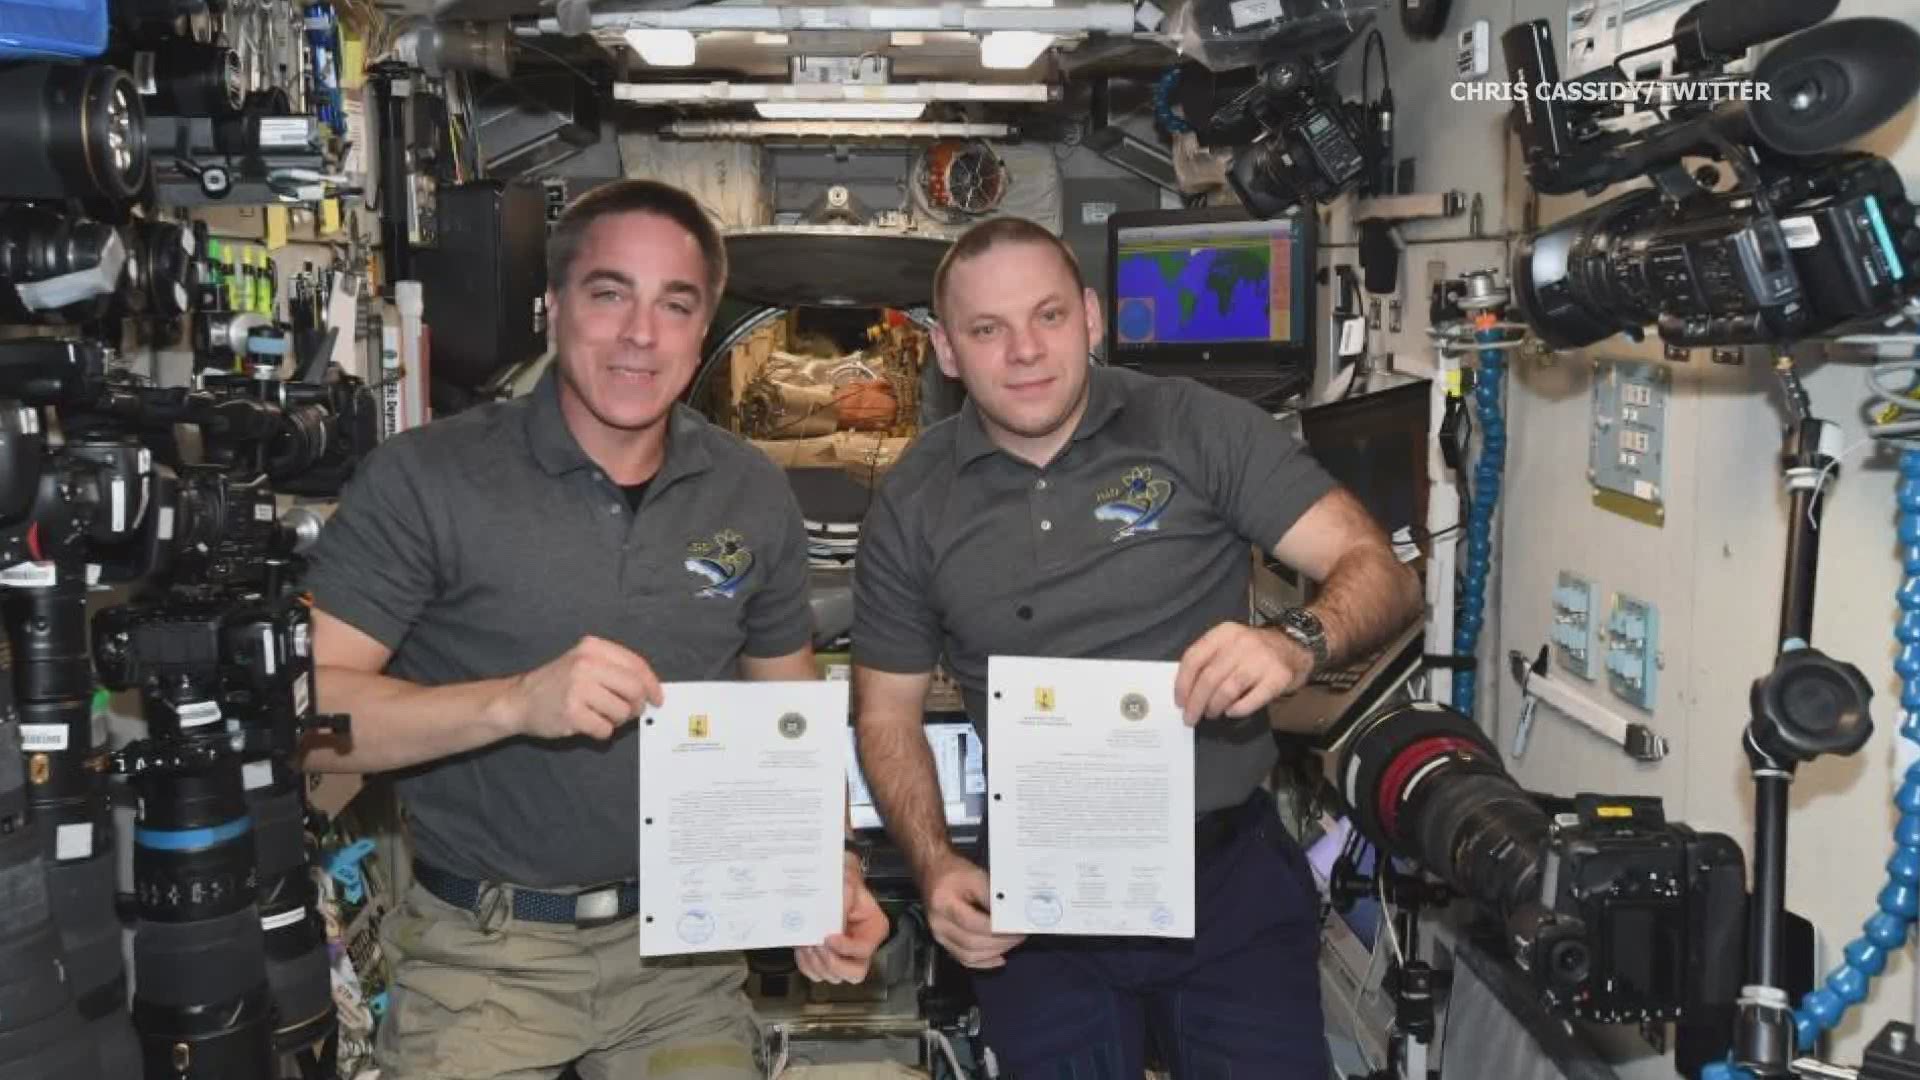 Maine astronaut Chris Cassidy and Russian crewmate receive letter from their hometown regions, which happen to be sister cities